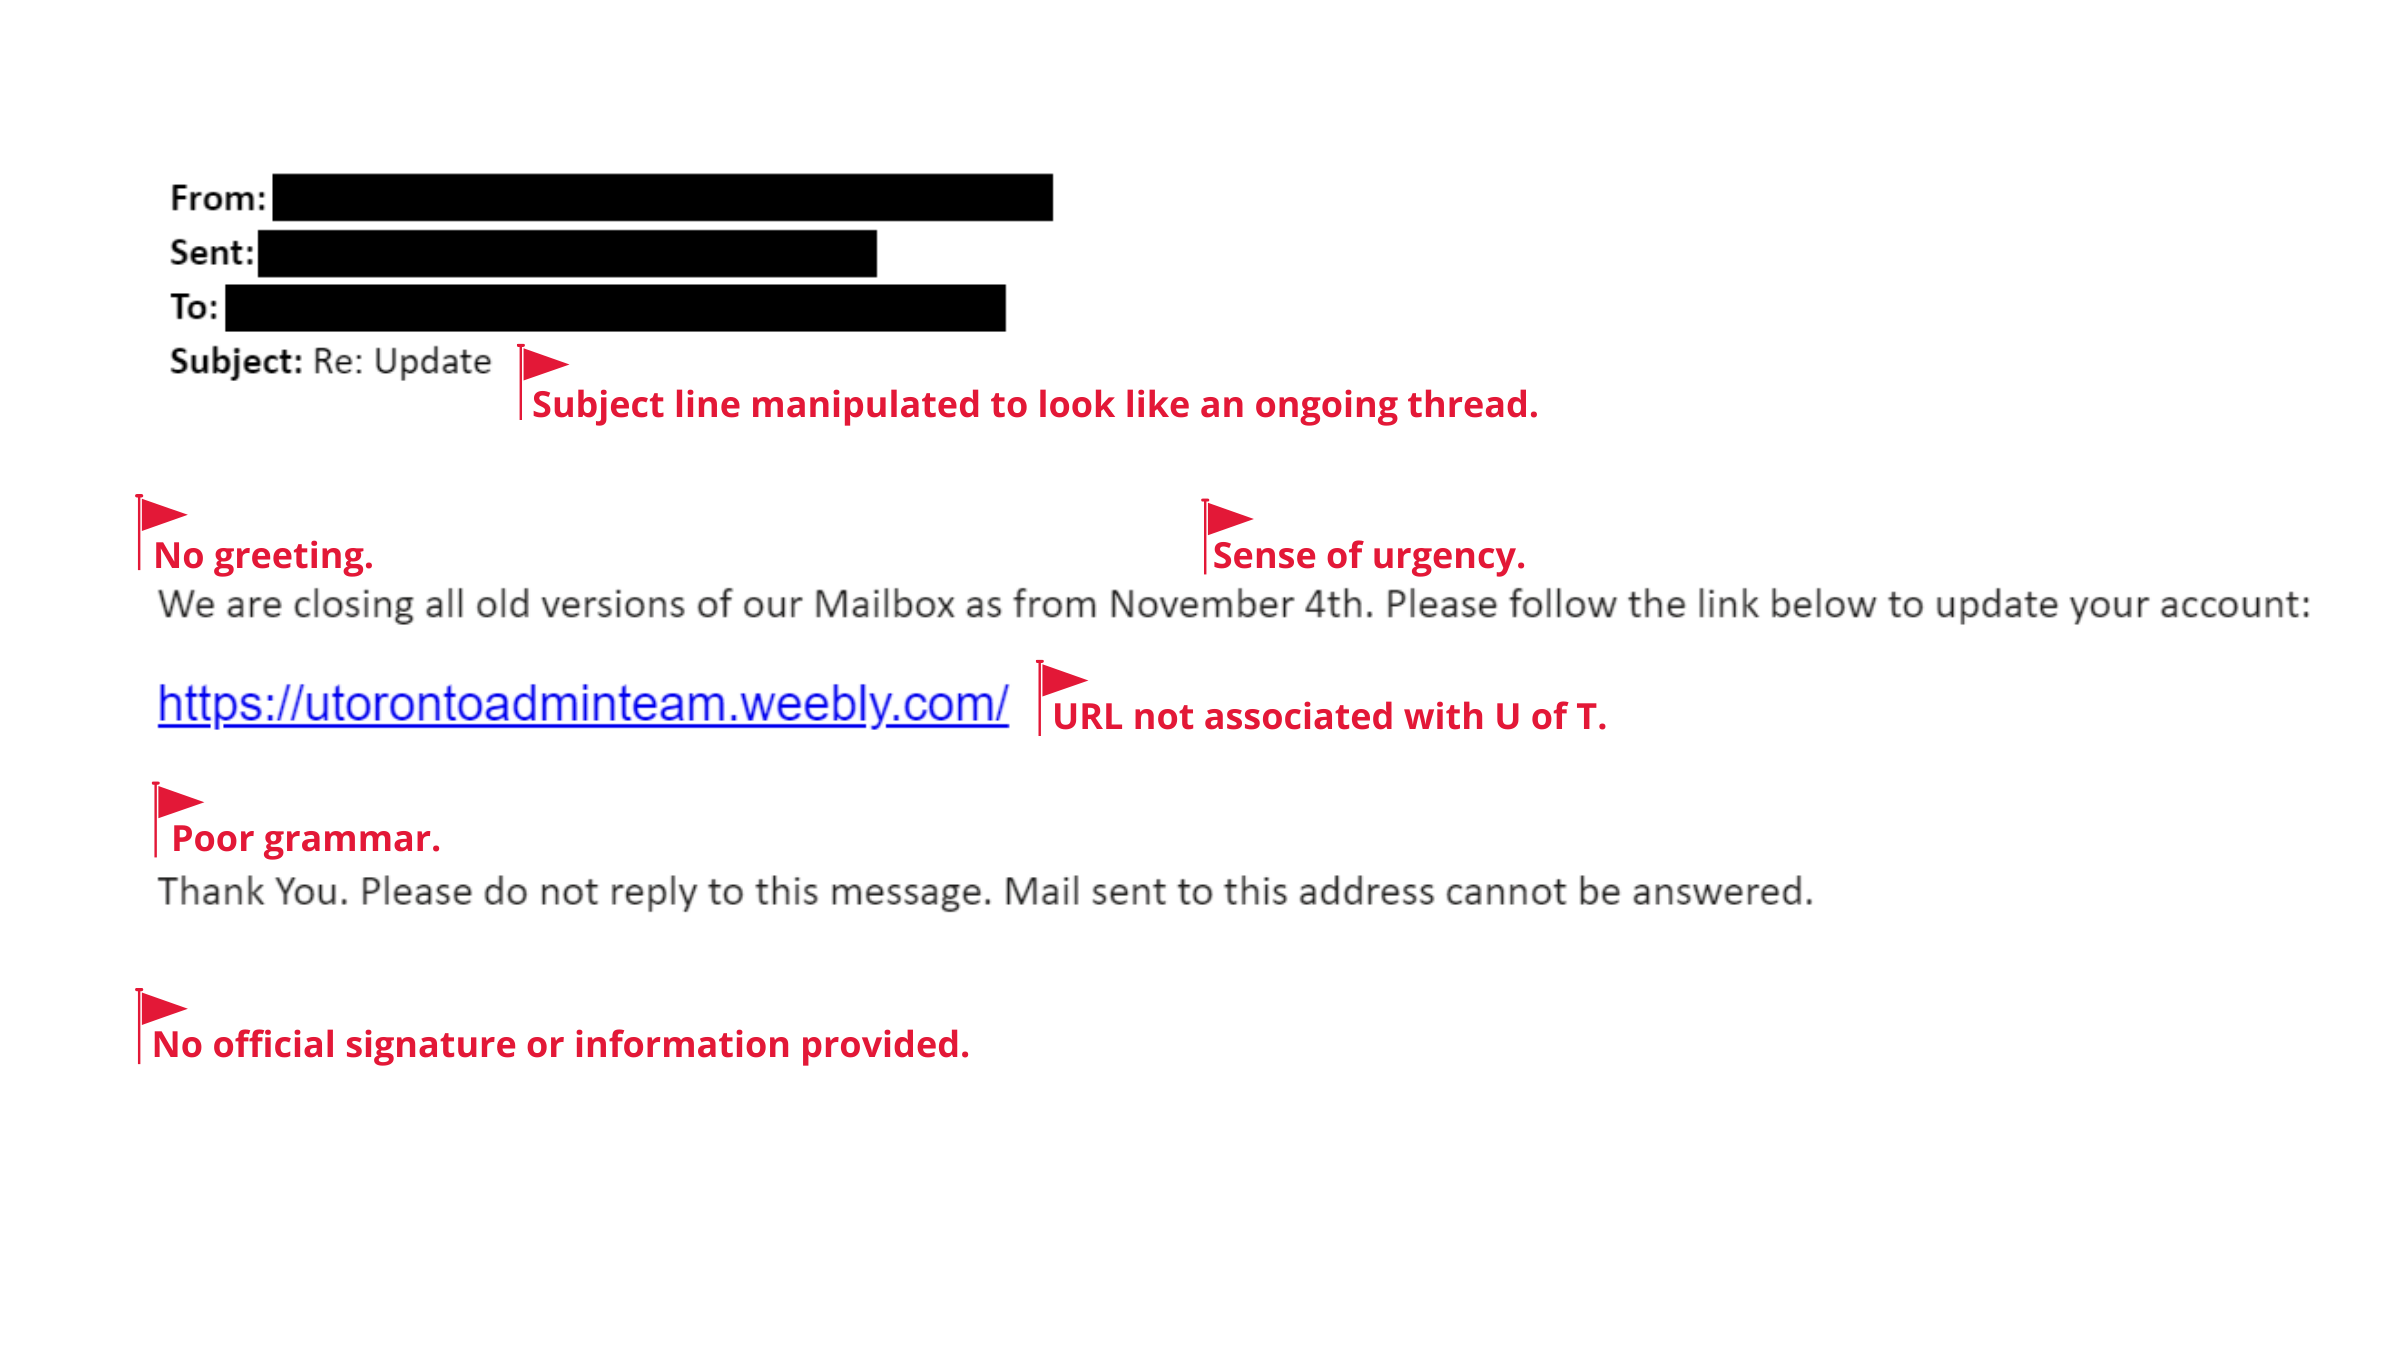 Phishing email pretending to be U of T IT department